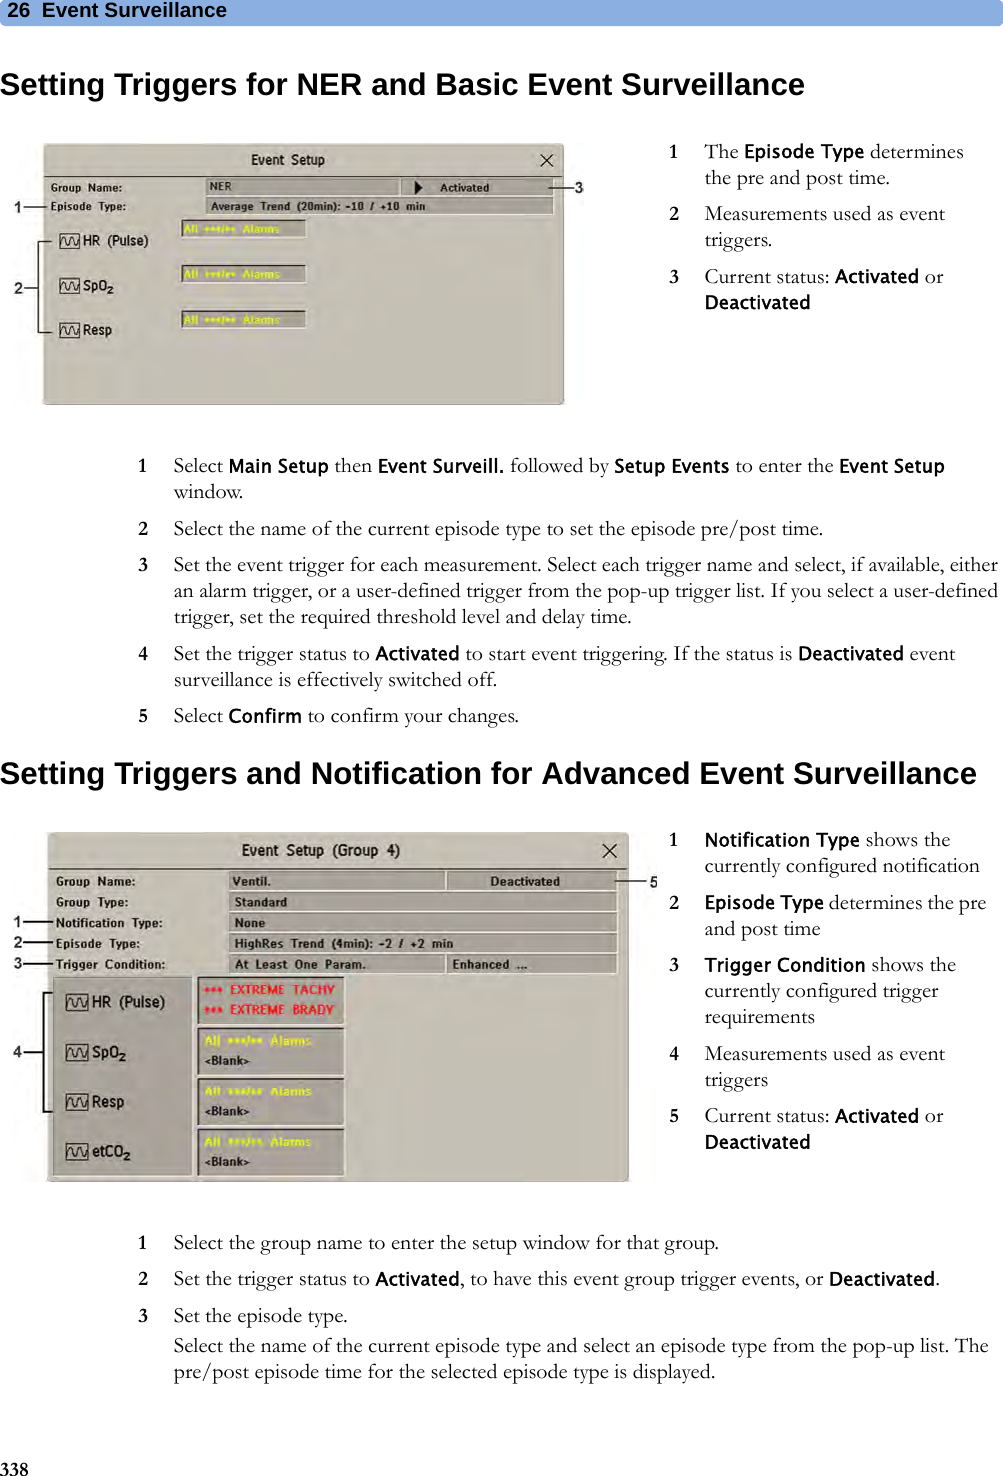 26 Event Surveillance338Setting Triggers for NER and Basic Event Surveillance1Select Main Setup then Event Surveill. followed by Setup Events to enter the Event Setup window.2Select the name of the current episode type to set the episode pre/post time.3Set the event trigger for each measurement. Select each trigger name and select, if available, either an alarm trigger, or a user-defined trigger from the pop-up trigger list. If you select a user-defined trigger, set the required threshold level and delay time.4Set the trigger status to Activated to start event triggering. If the status is Deactivated event surveillance is effectively switched off.5Select Confirm to confirm your changes.Setting Triggers and Notification for Advanced Event Surveillance1Select the group name to enter the setup window for that group.2Set the trigger status to Activated, to have this event group trigger events, or Deactivated.3Set the episode type.Select the name of the current episode type and select an episode type from the pop-up list. The pre/post episode time for the selected episode type is displayed.1The Episode Type determines the pre and post time.2Measurements used as event triggers.3Current status: Activated or Deactivated1Notification Type shows the currently configured notification2Episode Type determines the pre and post time3Trigger Condition shows the currently configured trigger requirements4Measurements used as event triggers5Current status: Activated or Deactivated